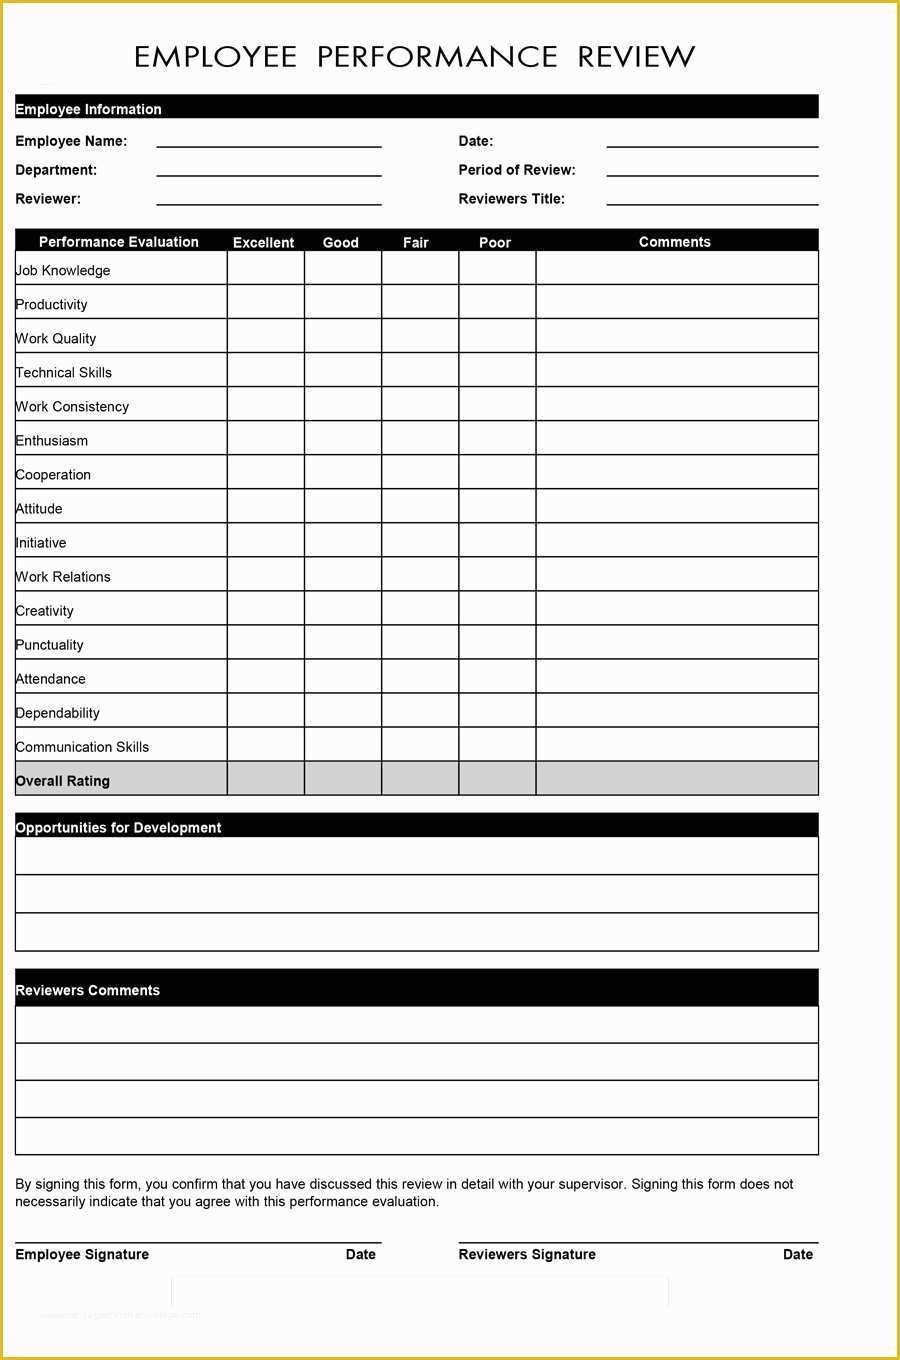 Free Performance Review Template Of 46 Employee Evaluation forms & Performance Review Examples